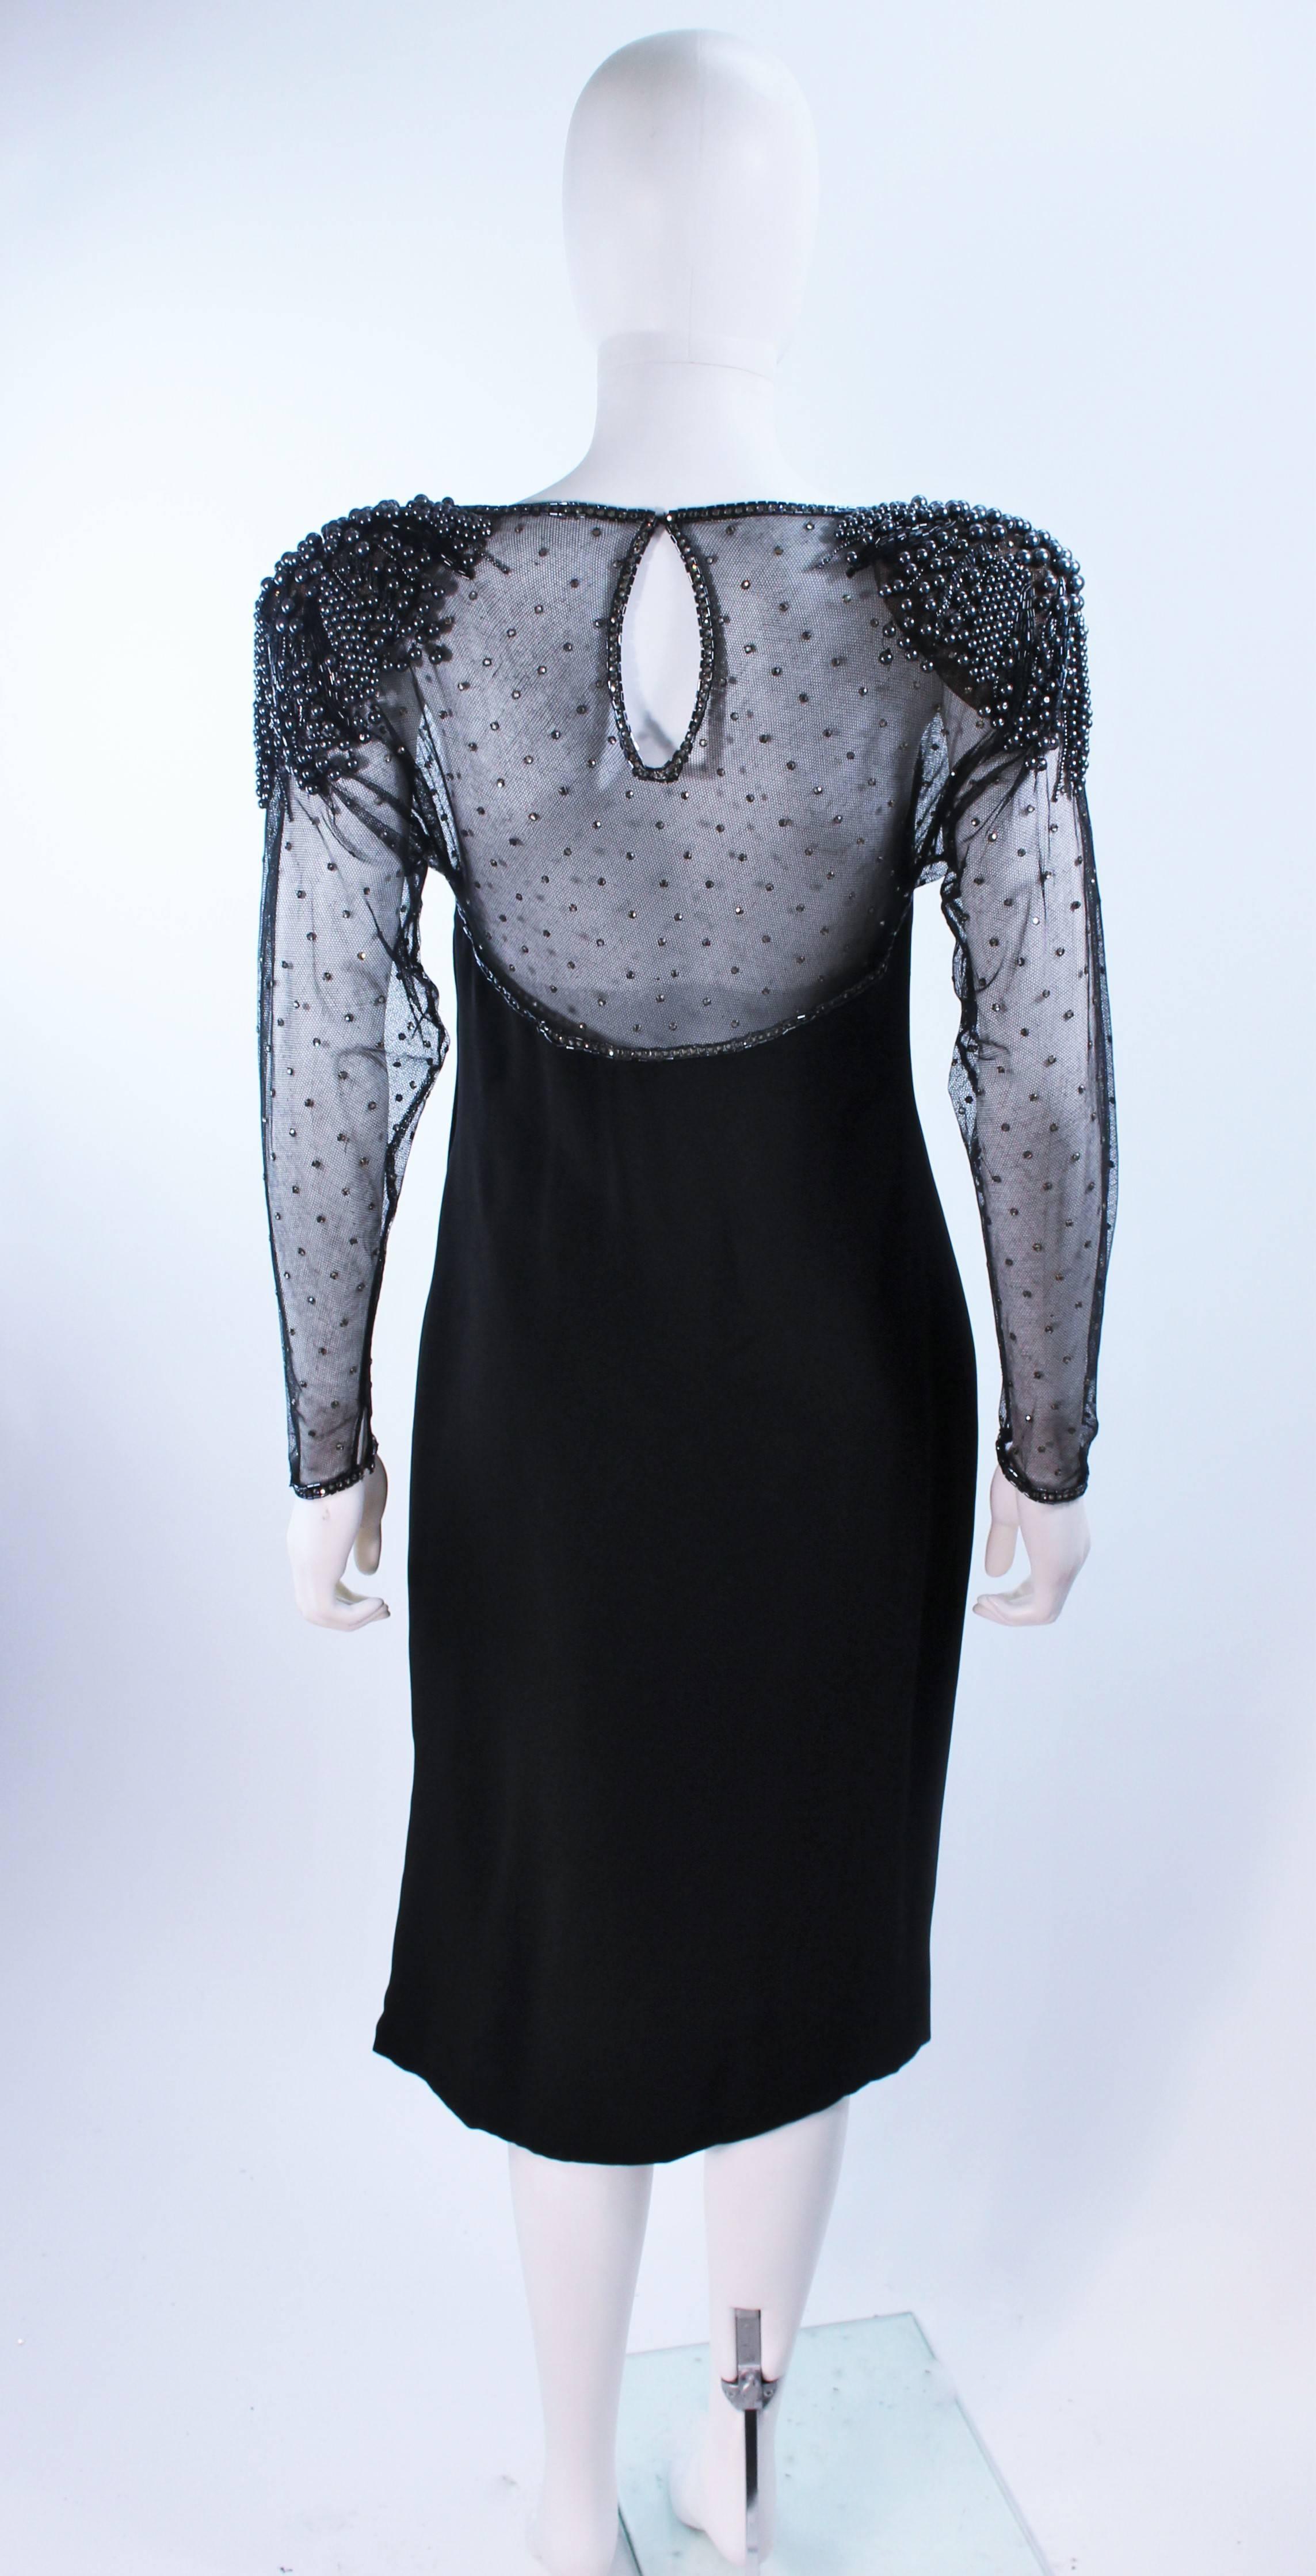 FRANK COMPOSTO Black Cocktail Dress with Sheer Beaded Sleeves Size 8 For Sale 2